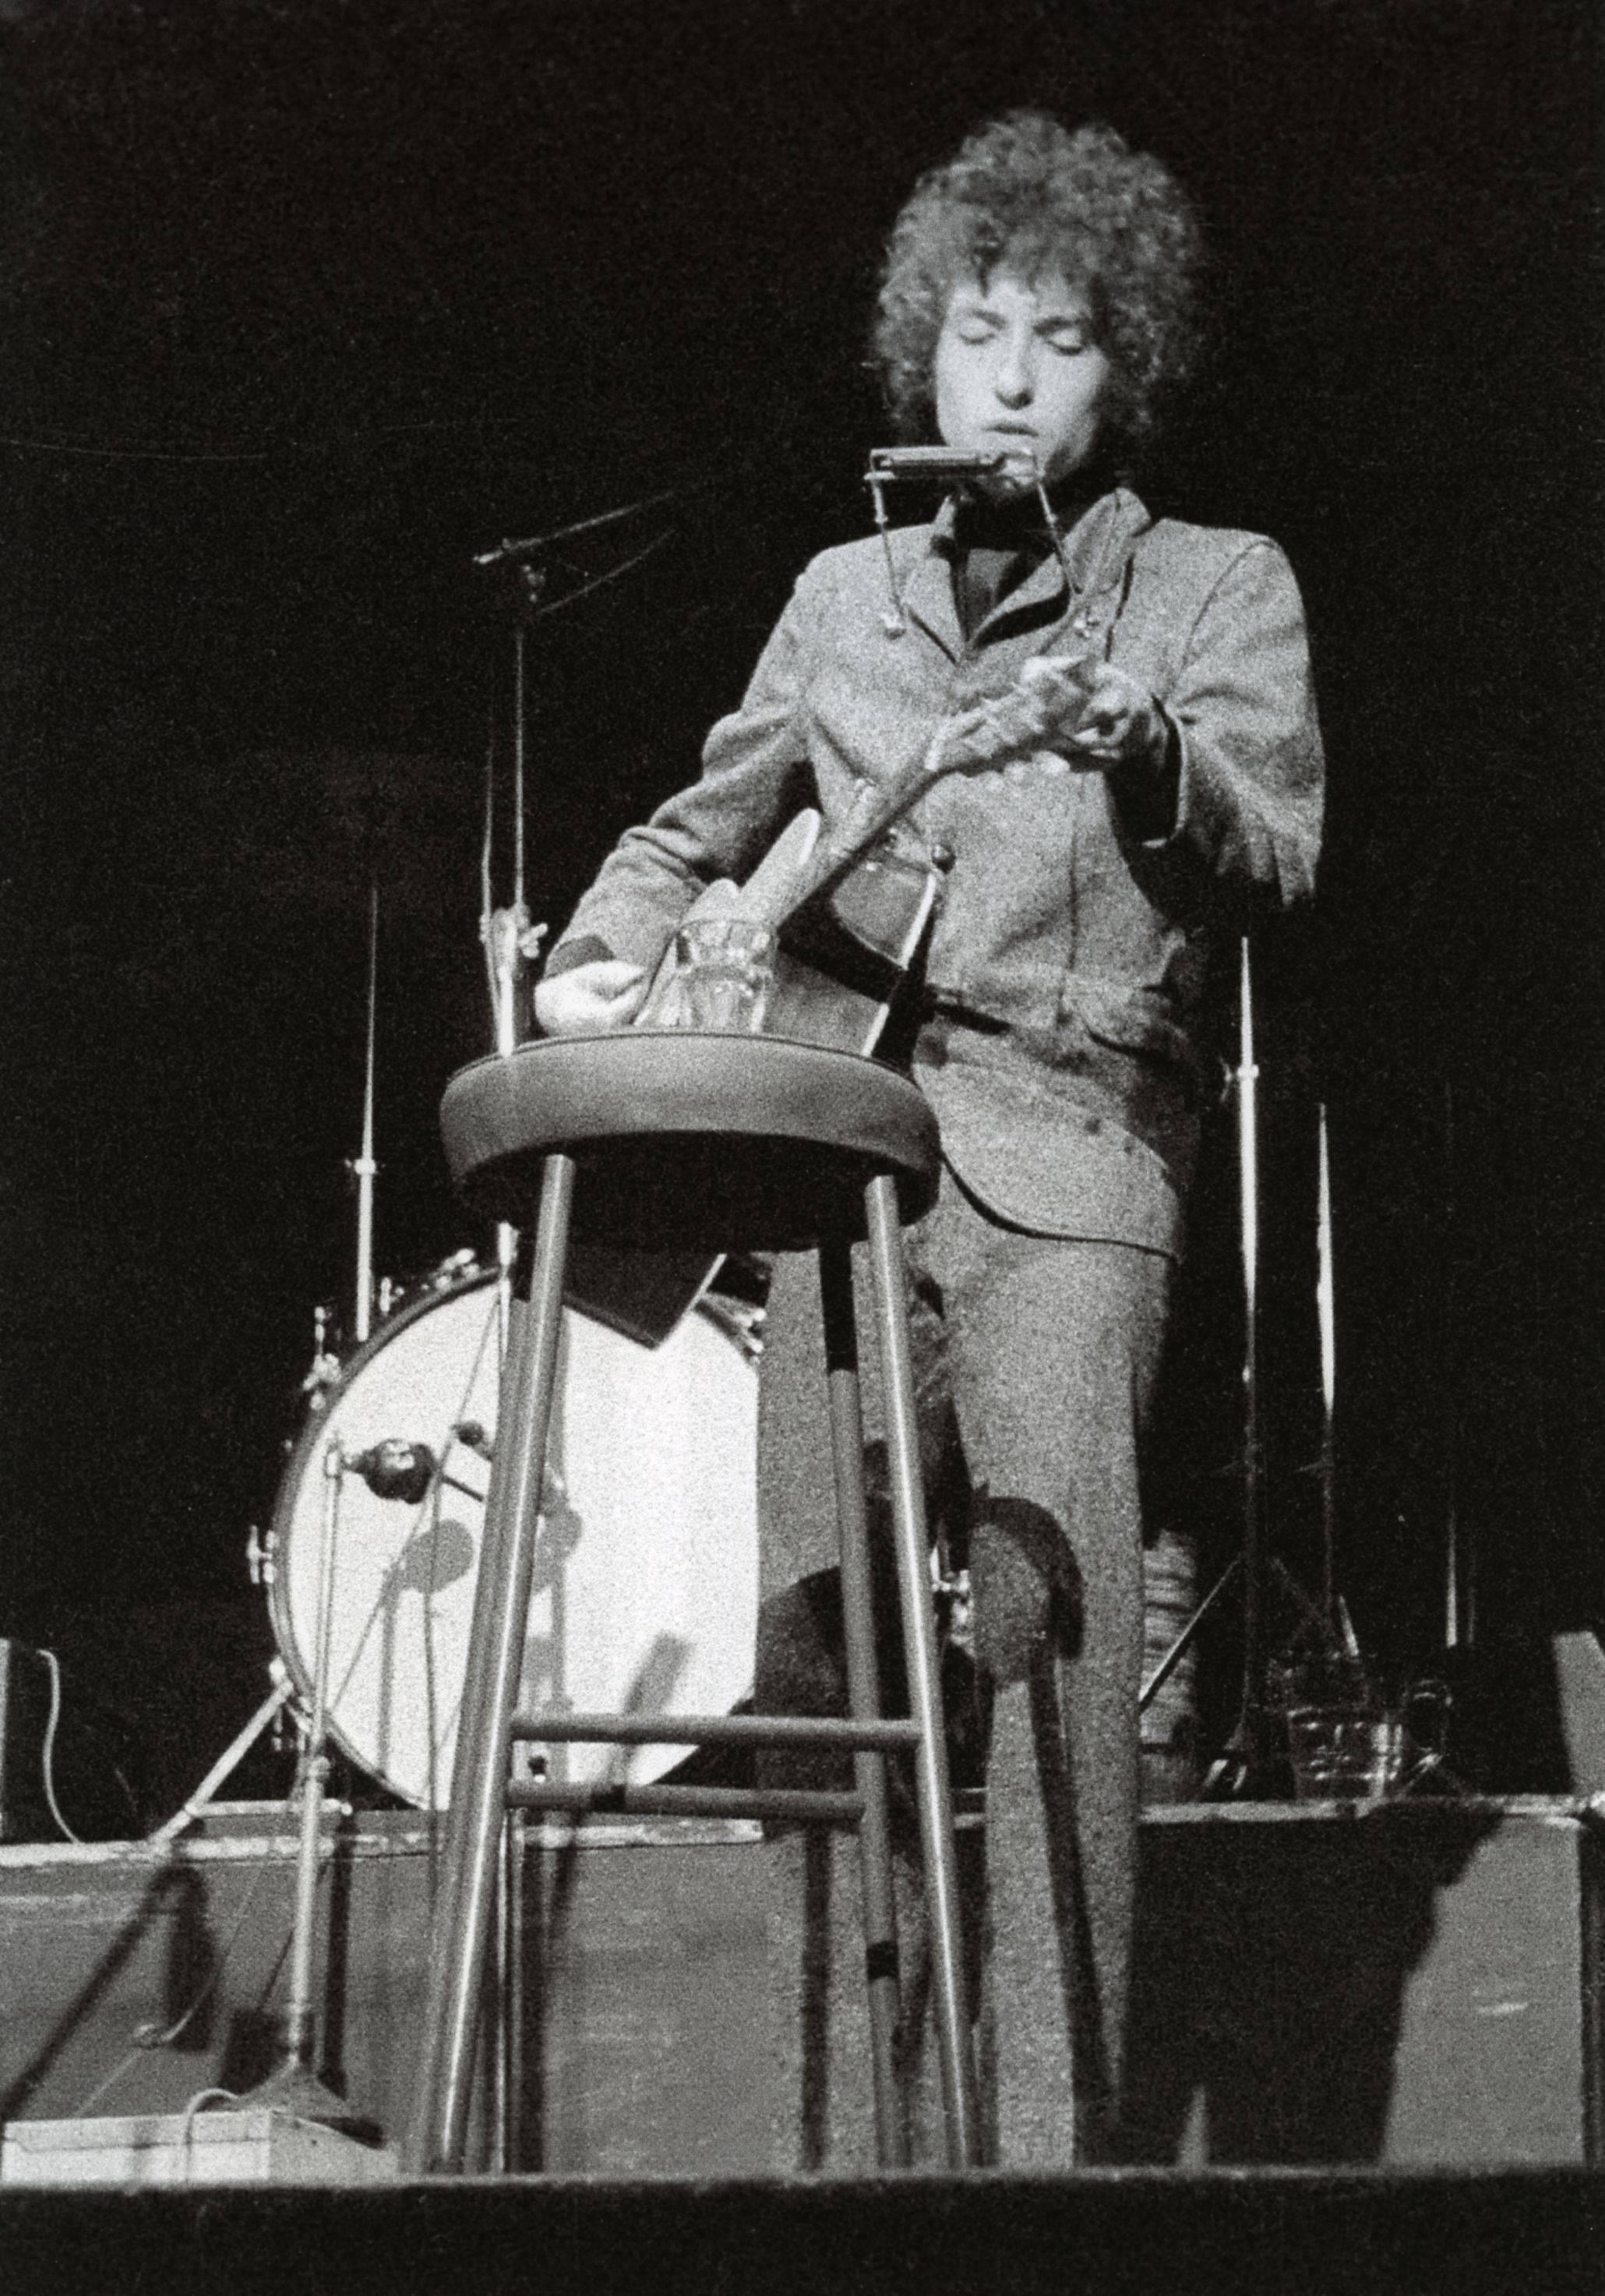 Unknown Portrait Photograph - Bob Dylan Performing on Stage with His Hamonica, Vintage Original Photograph